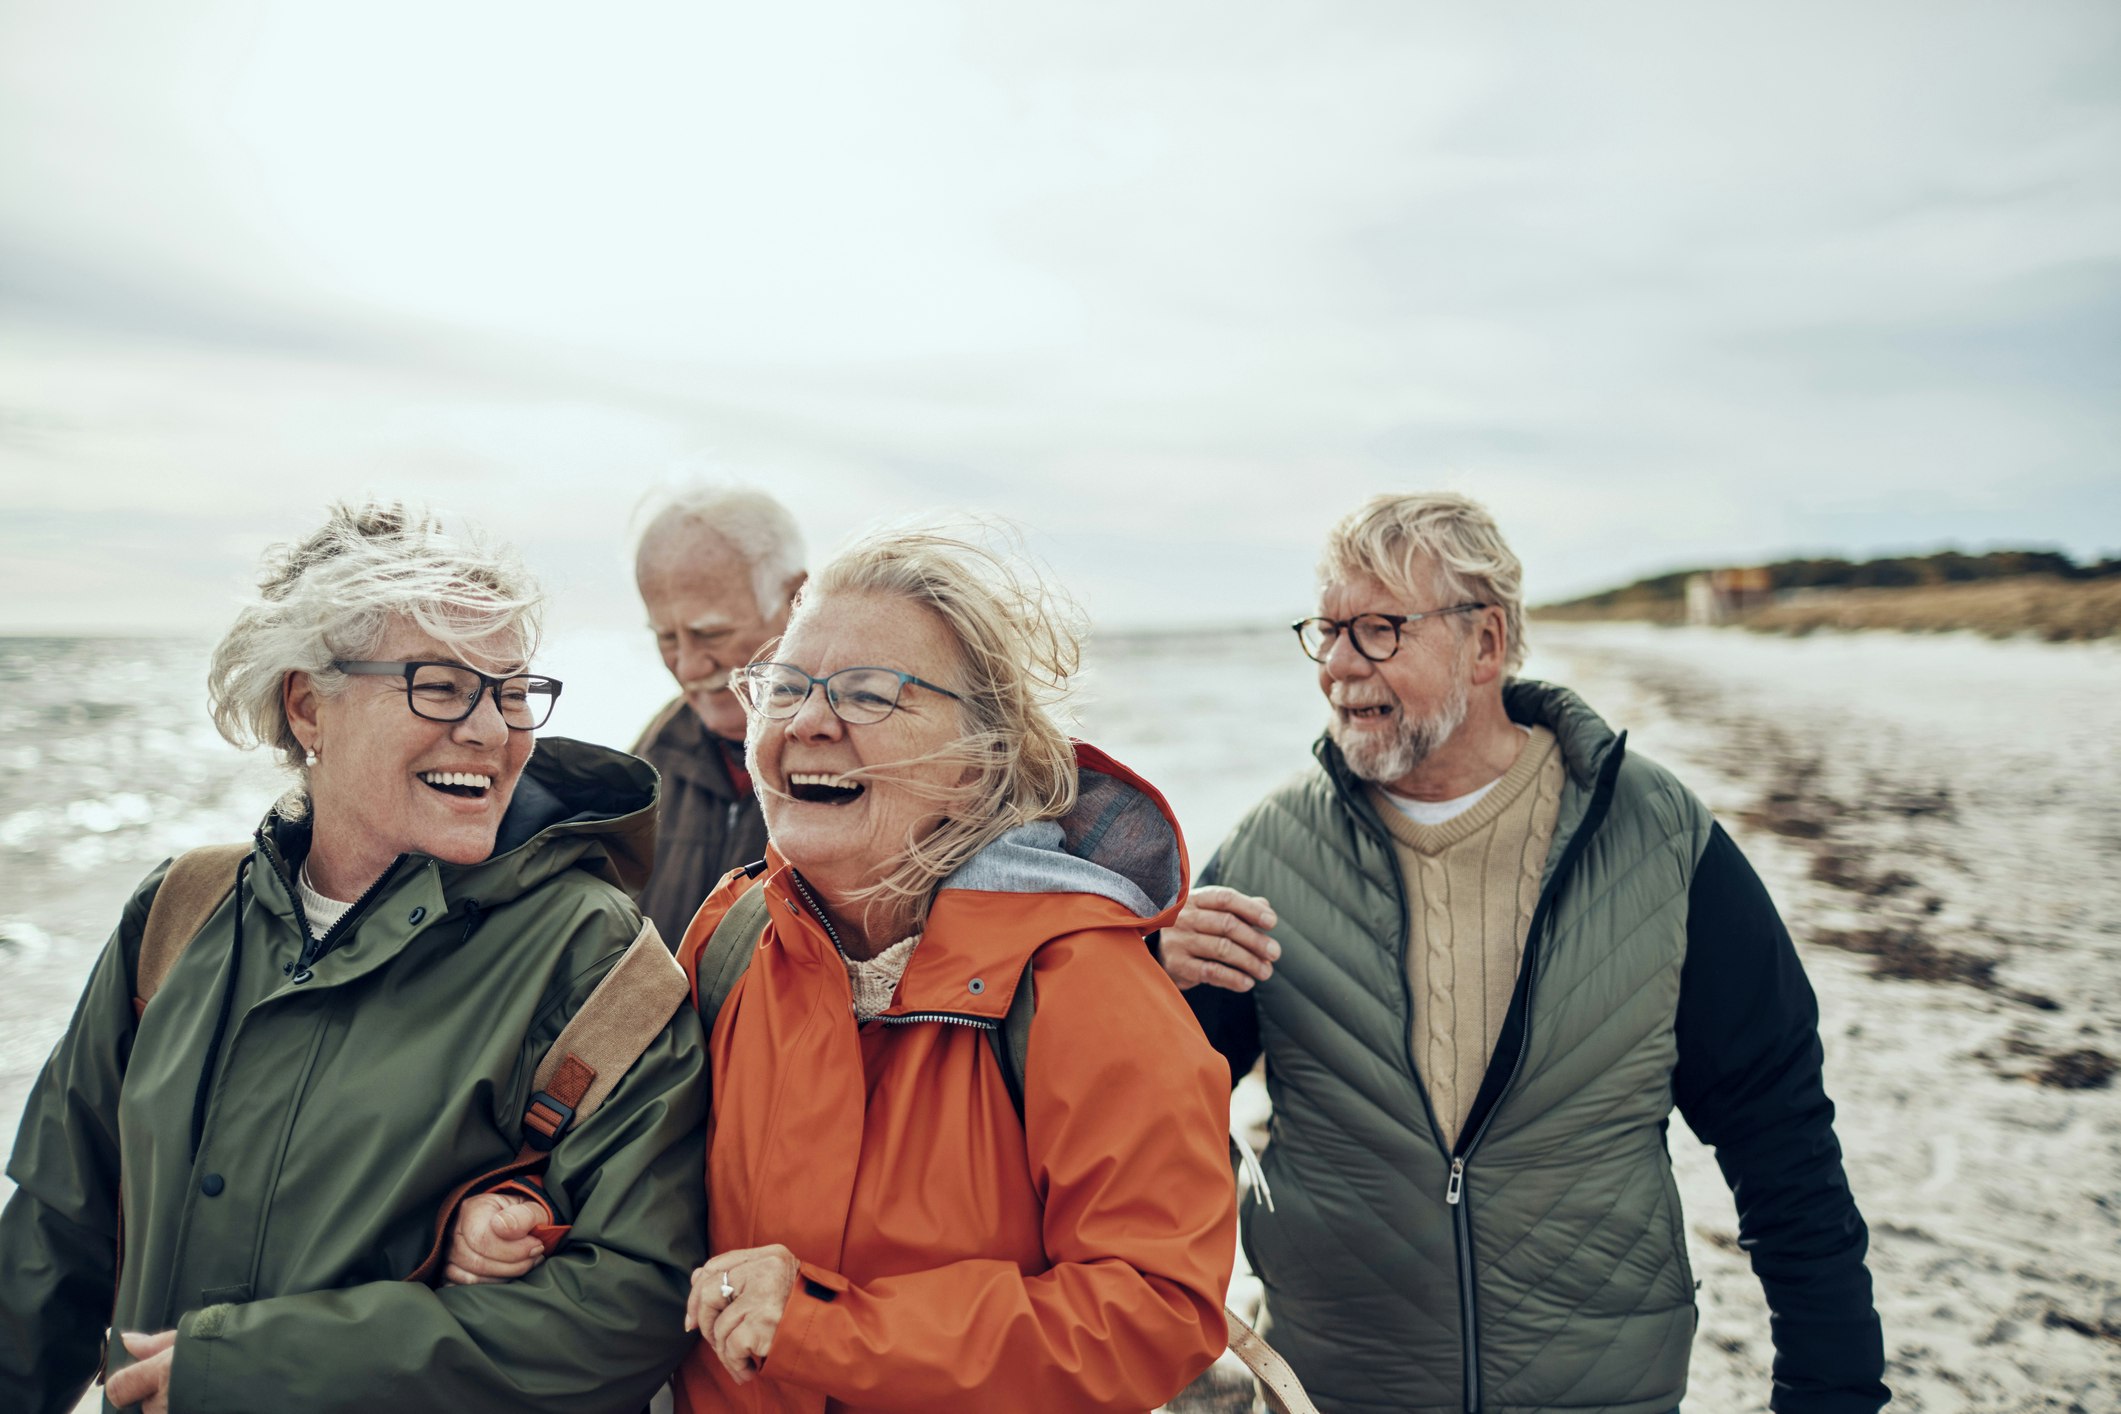 An older friend group of two men and two women walking along the beach in rain jackets while laughing together